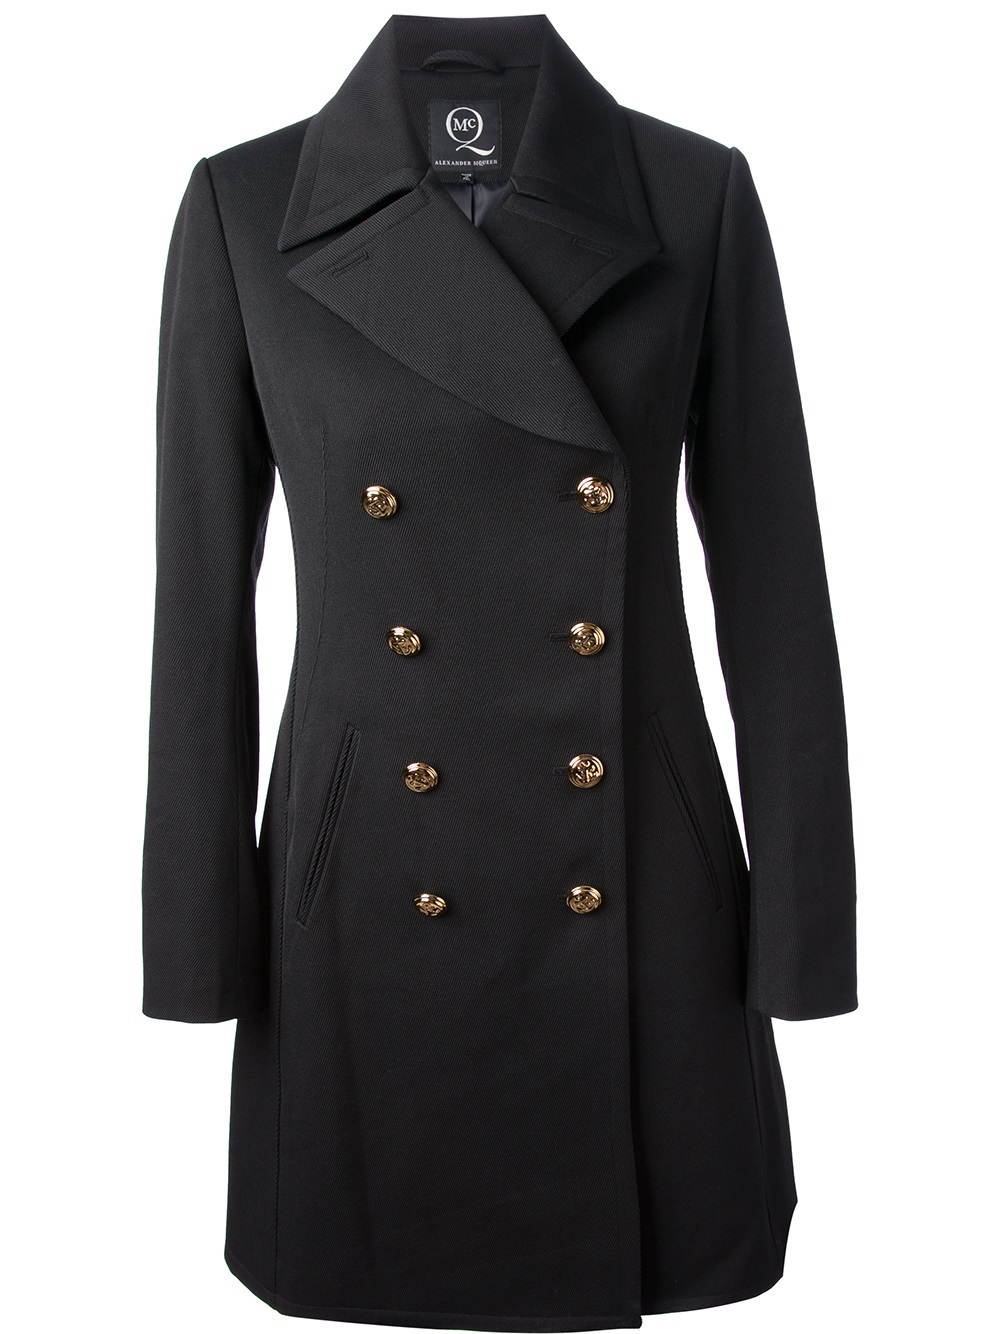 Lyst - Mcq Double Breasted Coat in Black